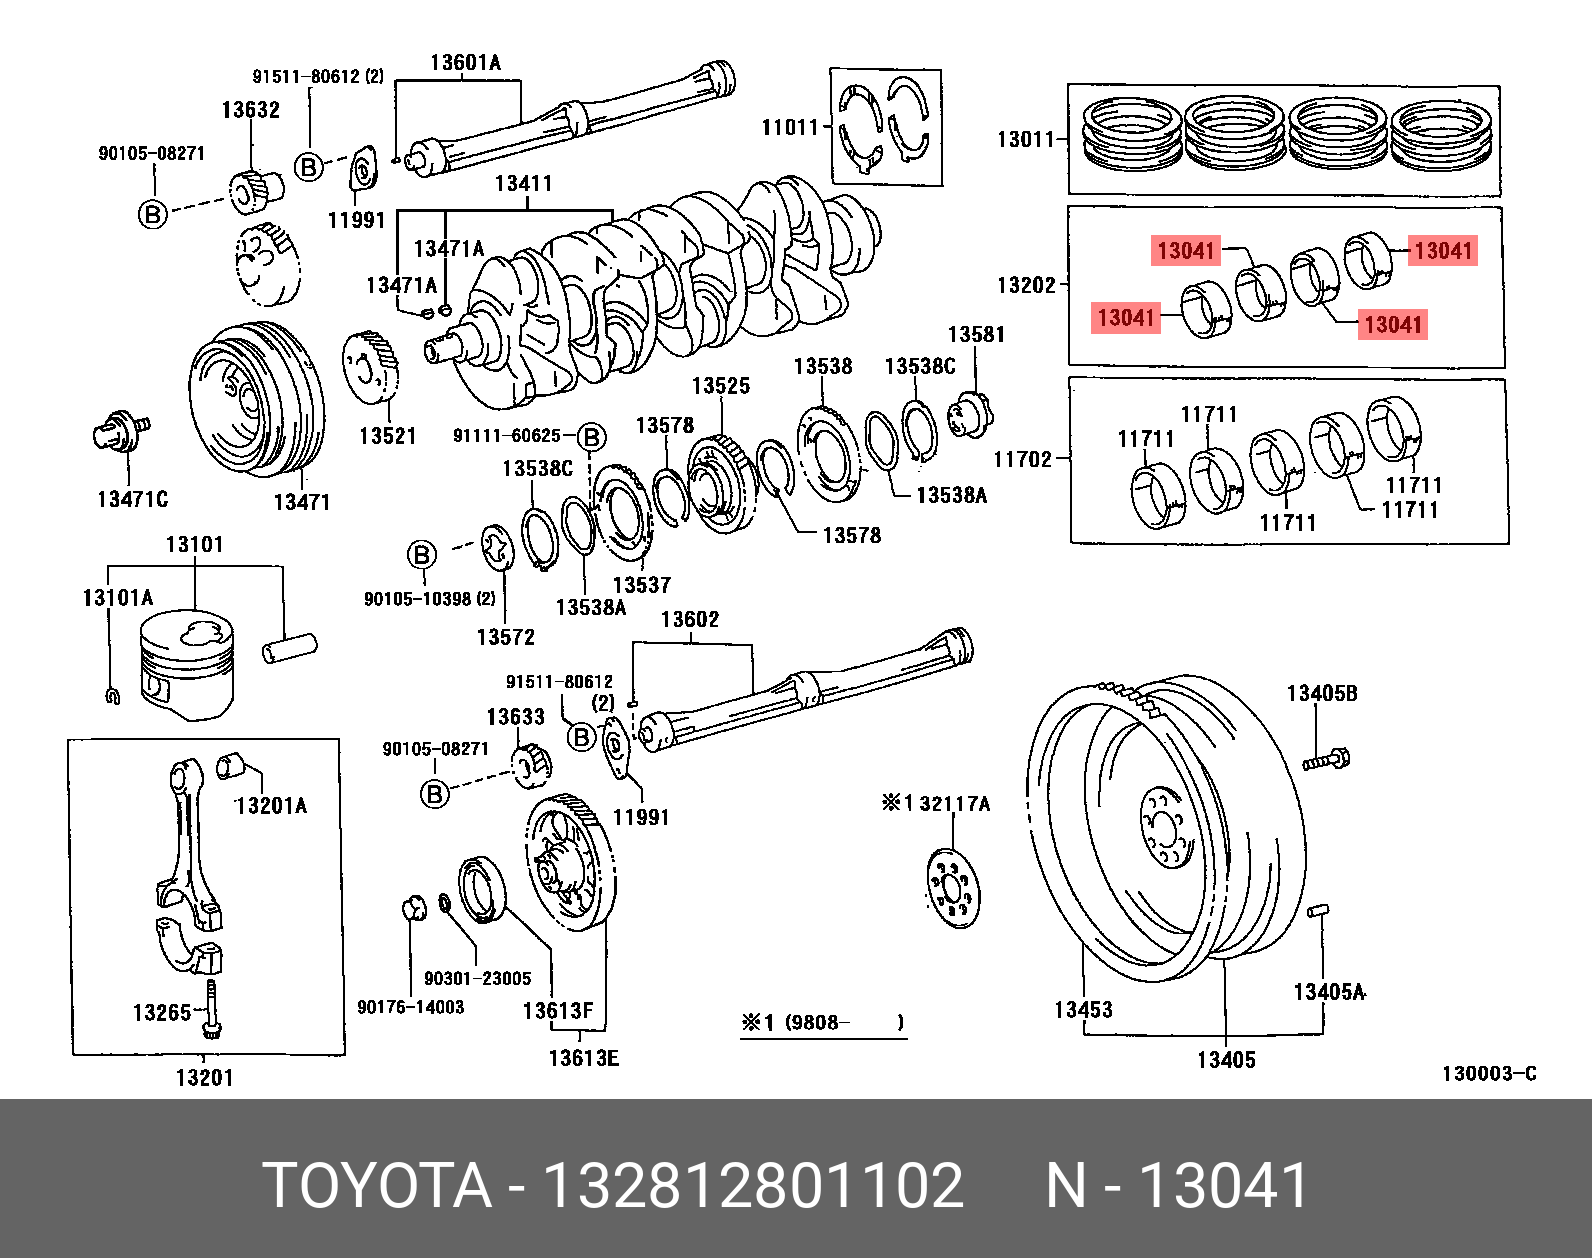 CAMRY 200601 - 201108, BEARING, CONNECTING ROD